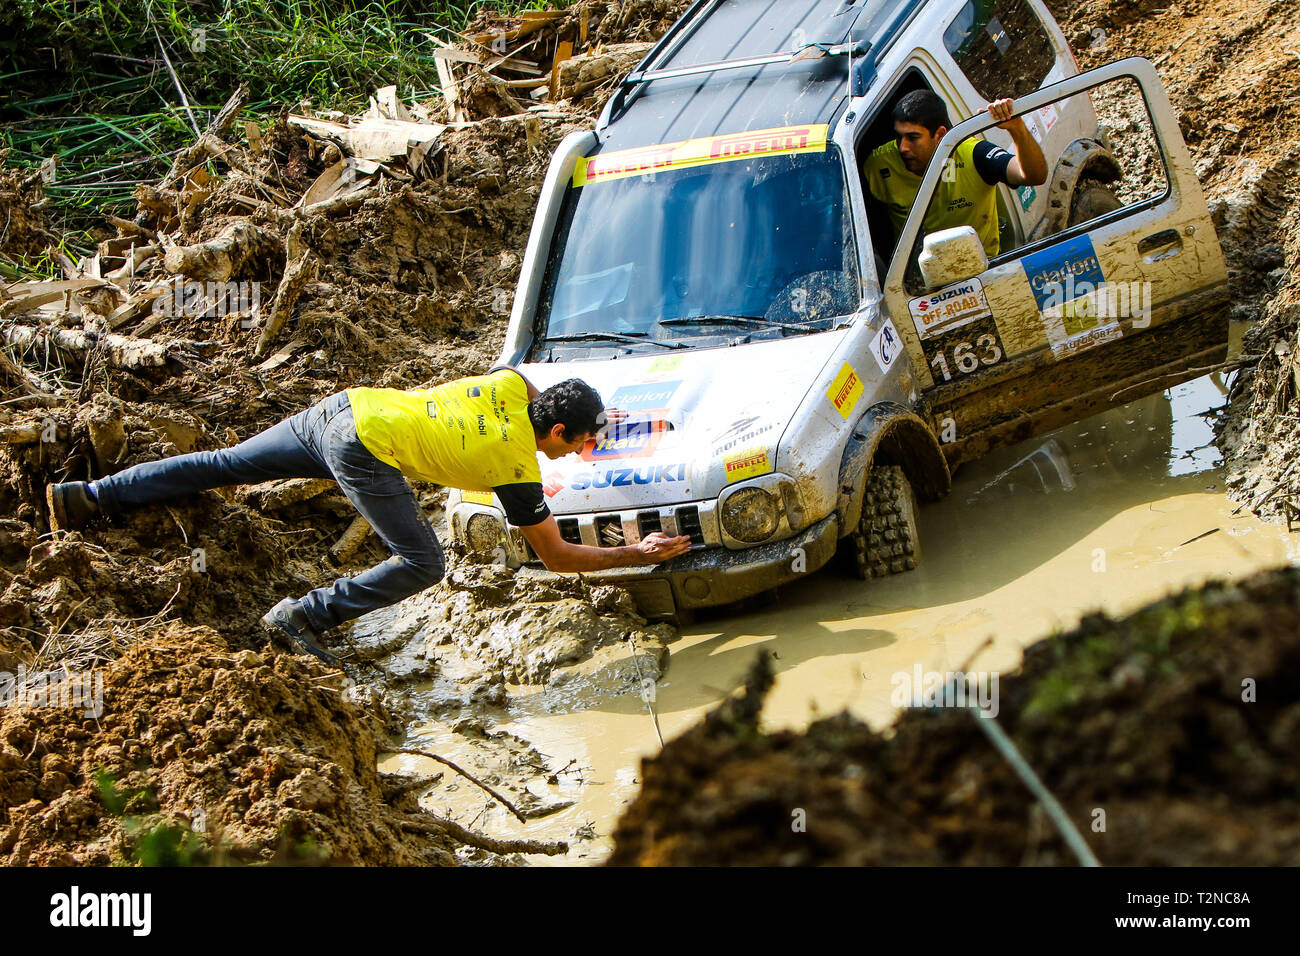 Sorocaba, Brazil. 23rd May, 2015. PHOTOS OF ARCHIVES. On April 4 is celebrated the Day of the 4x4 or Day of the Jeep. In the photo Suzuki jeeps participate in event in Pomerode, SC, in 2015. Pilots try to unbolt the car in the mud. Credit: Cadu Rolim/FotoArena/Alamy Live News Stock Photo